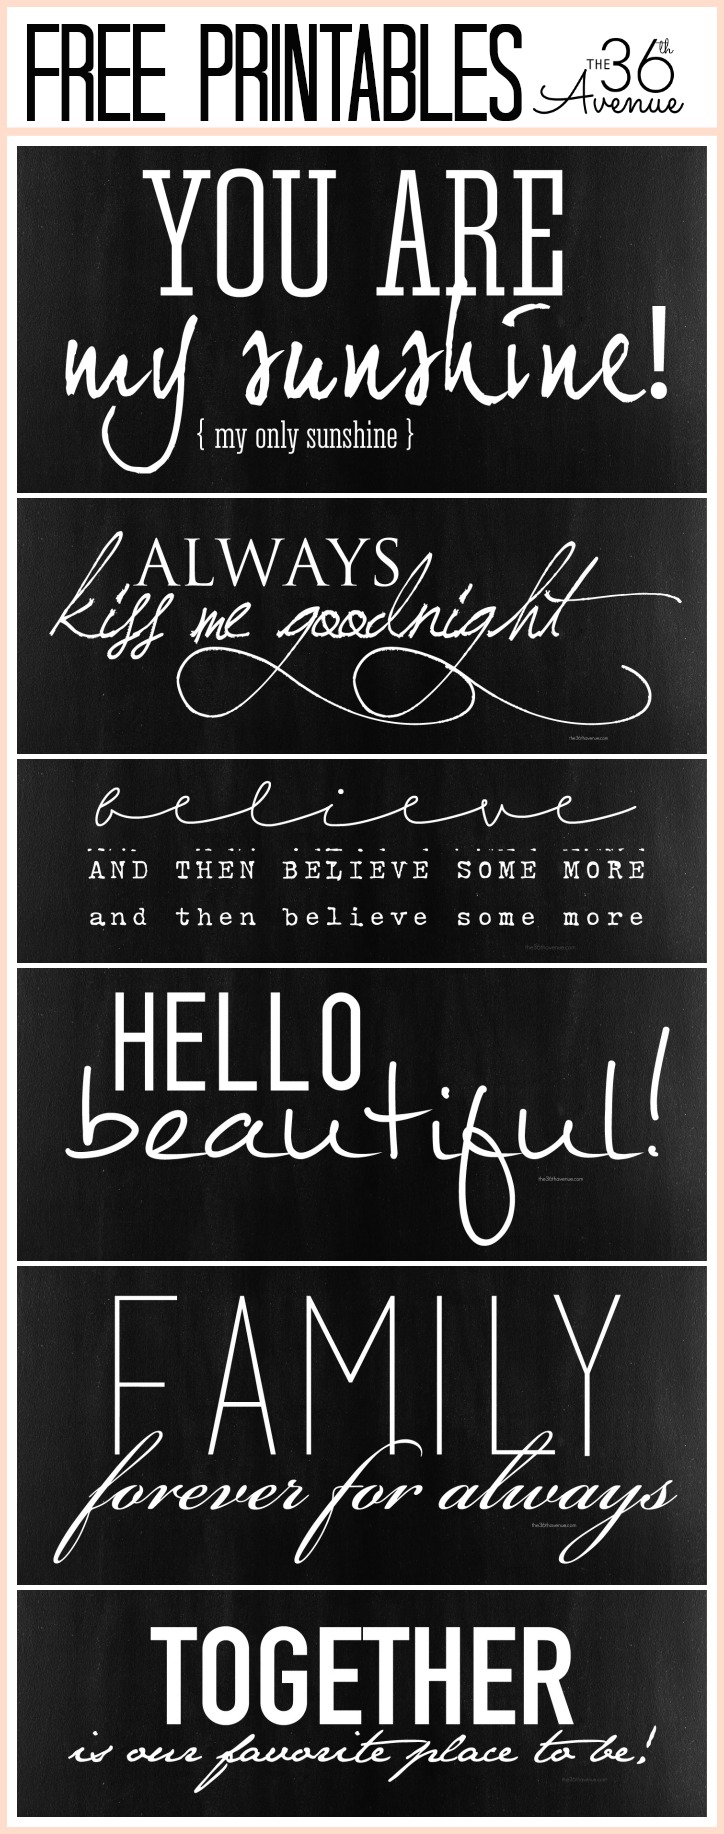 Free Fonts And Printable Combinations The 36th AVENUE